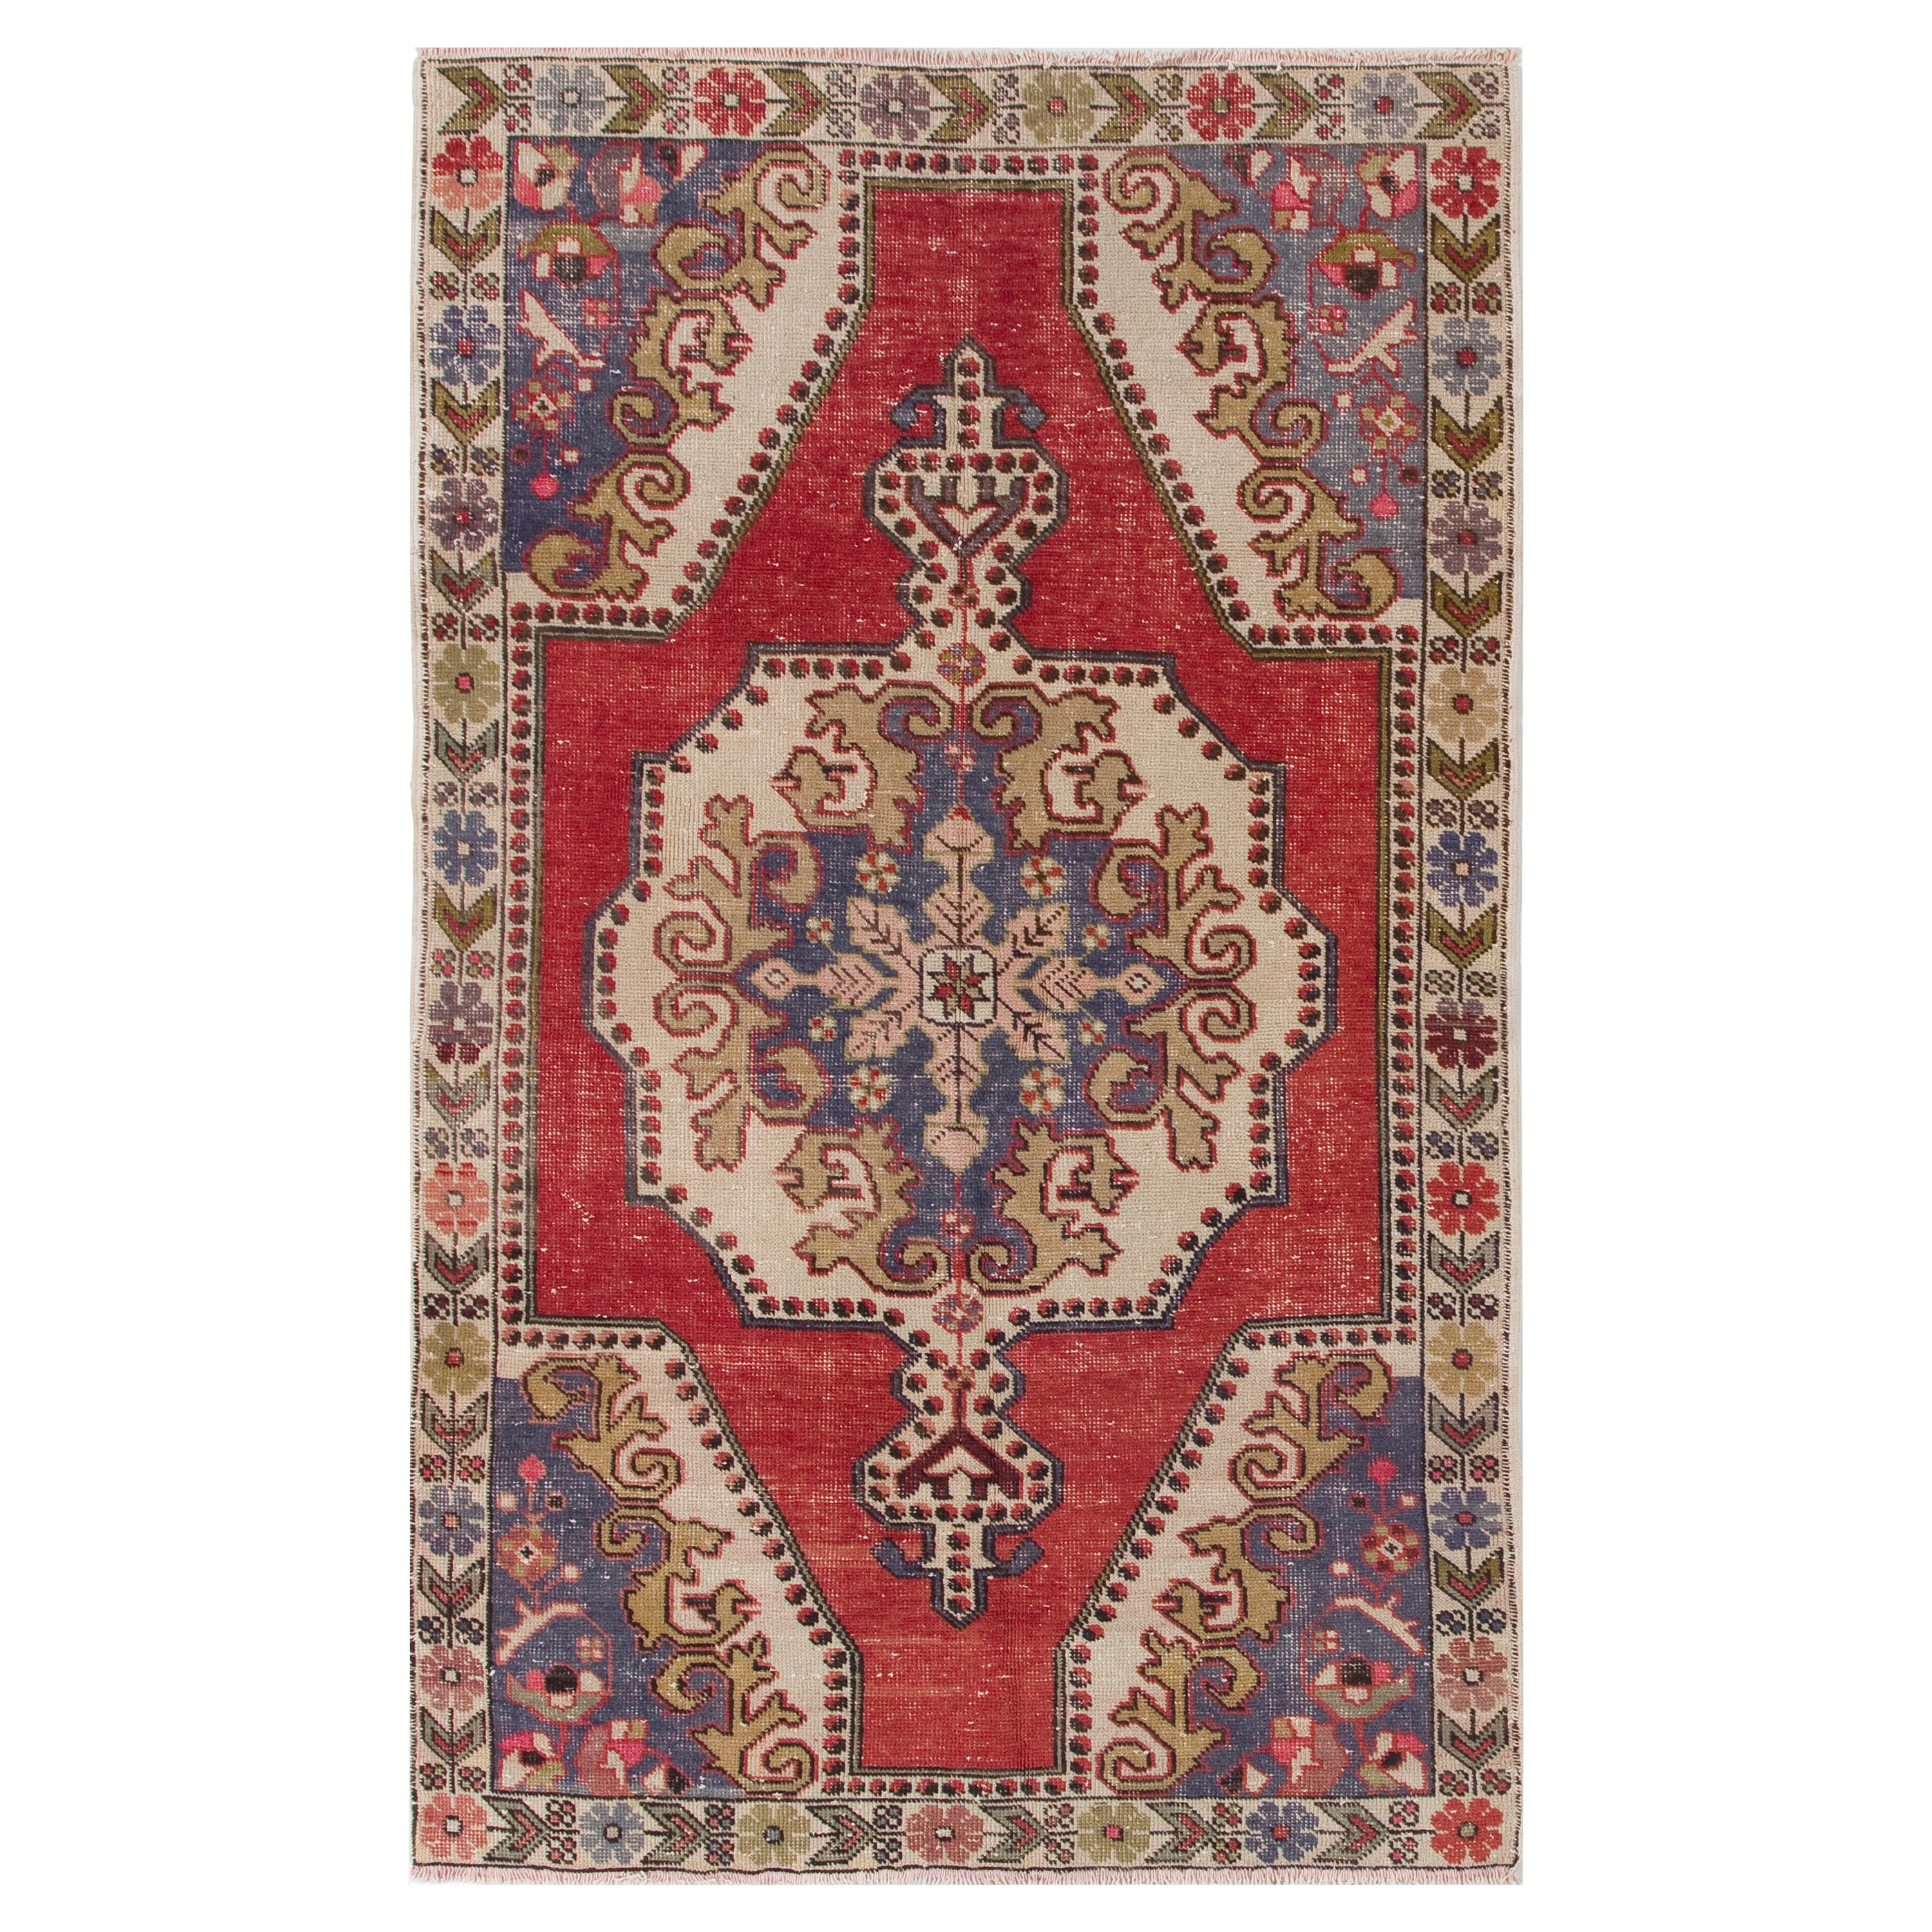 4.4x7.2 Ft Unique Anatolian Accent Rug with Floral Border. Red, Beige and Blue For Sale